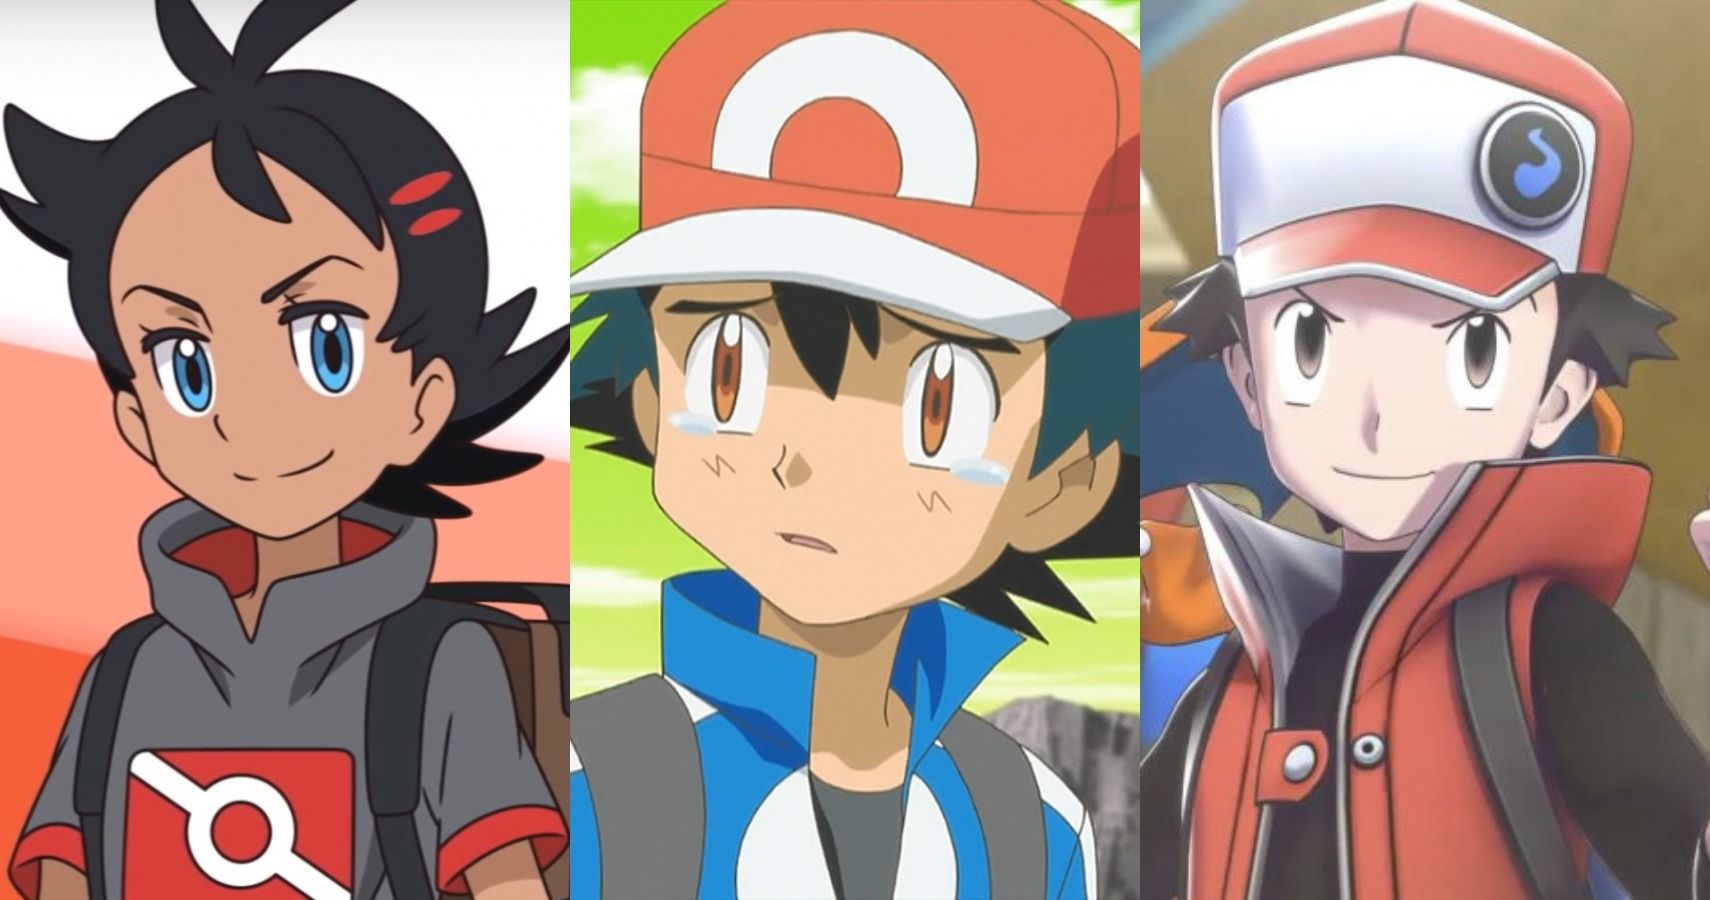 If Ash Ketchum S Time Is Over What S Next For The Pokémon